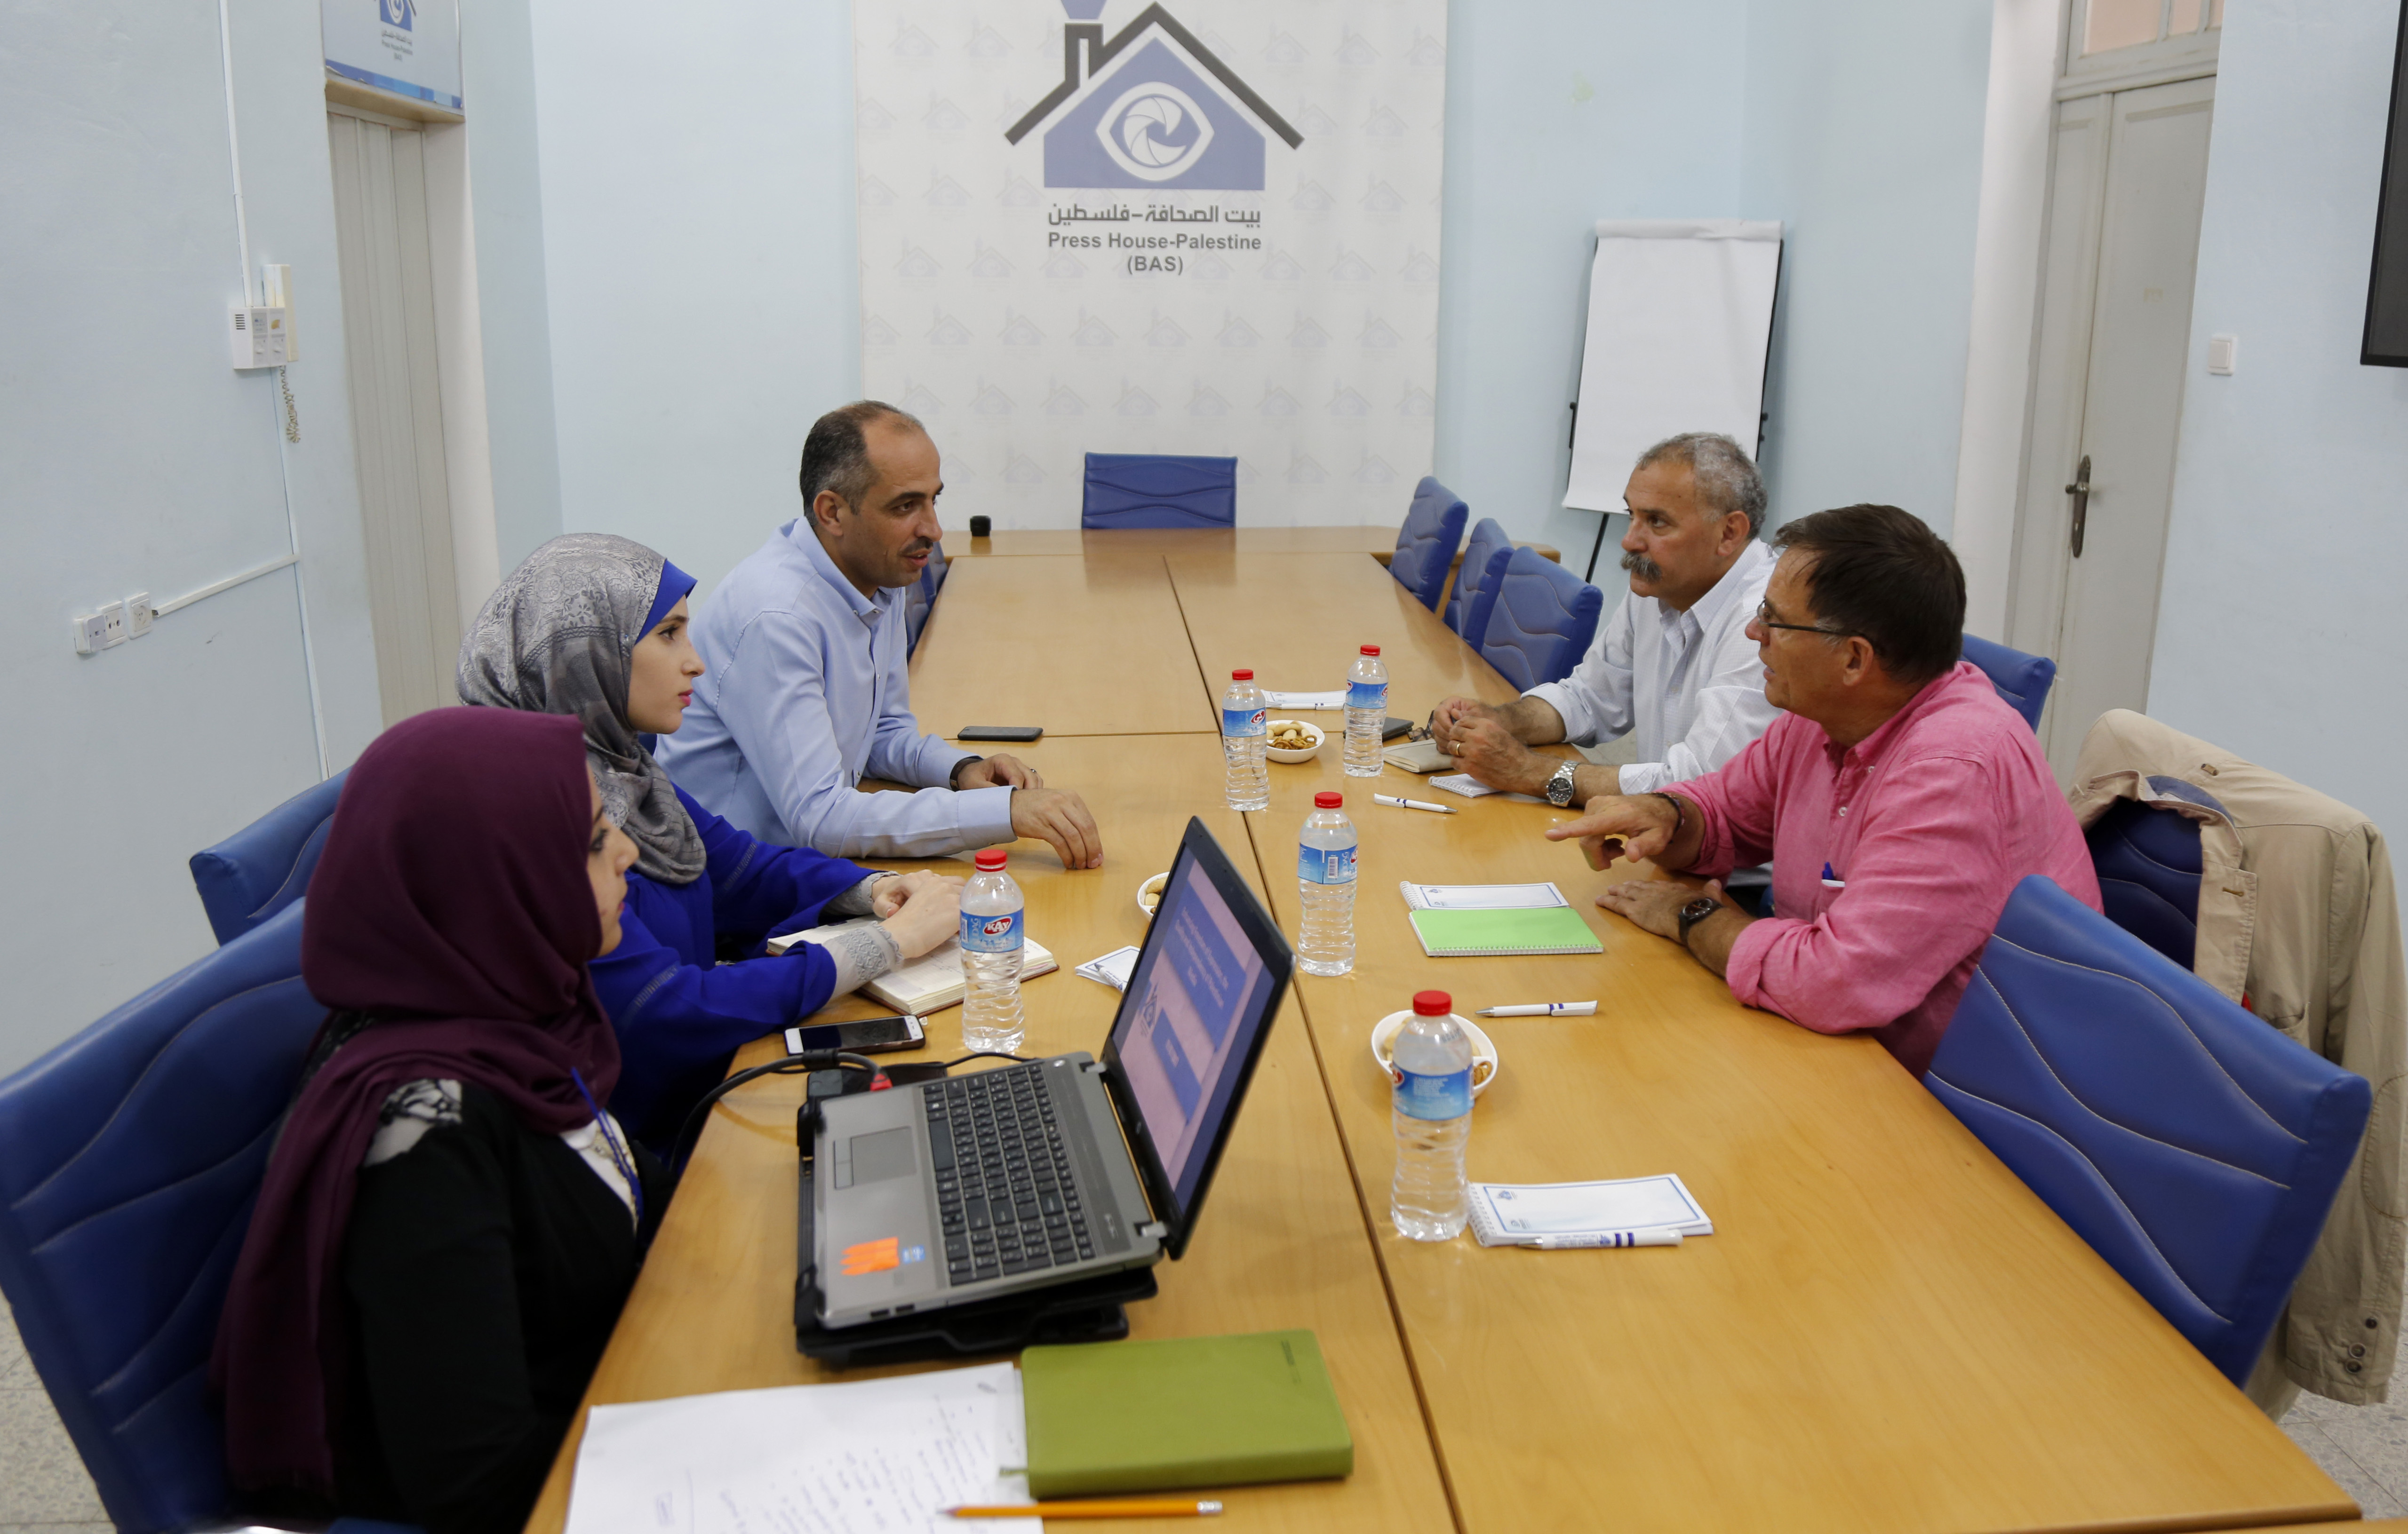 Press House Holds Its Semiannual Meeting with NRO